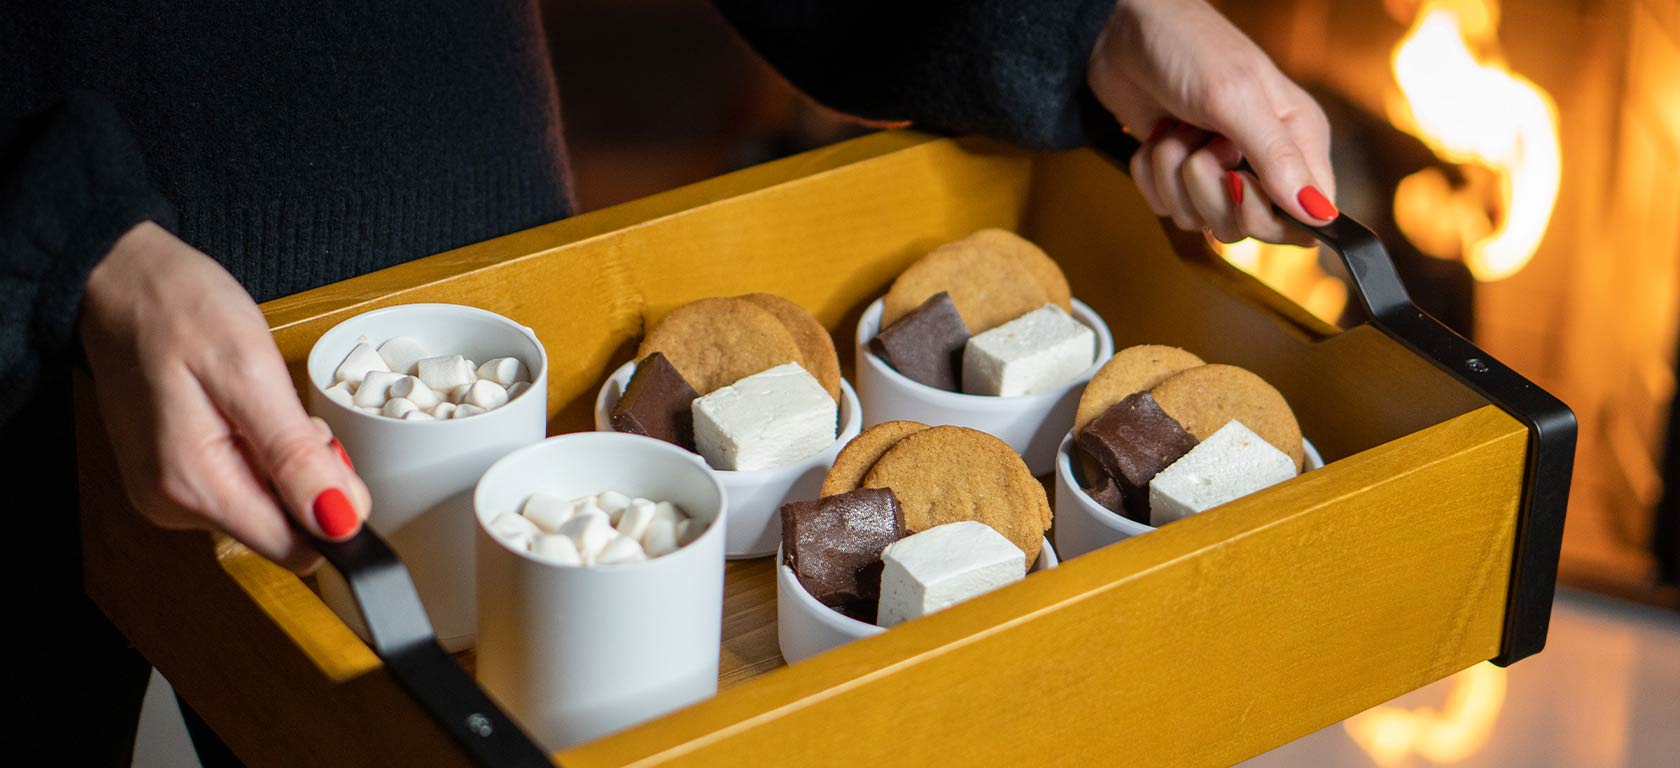 Minimalist golden brown wooden tray holding array of elegant mugs filled with smores.